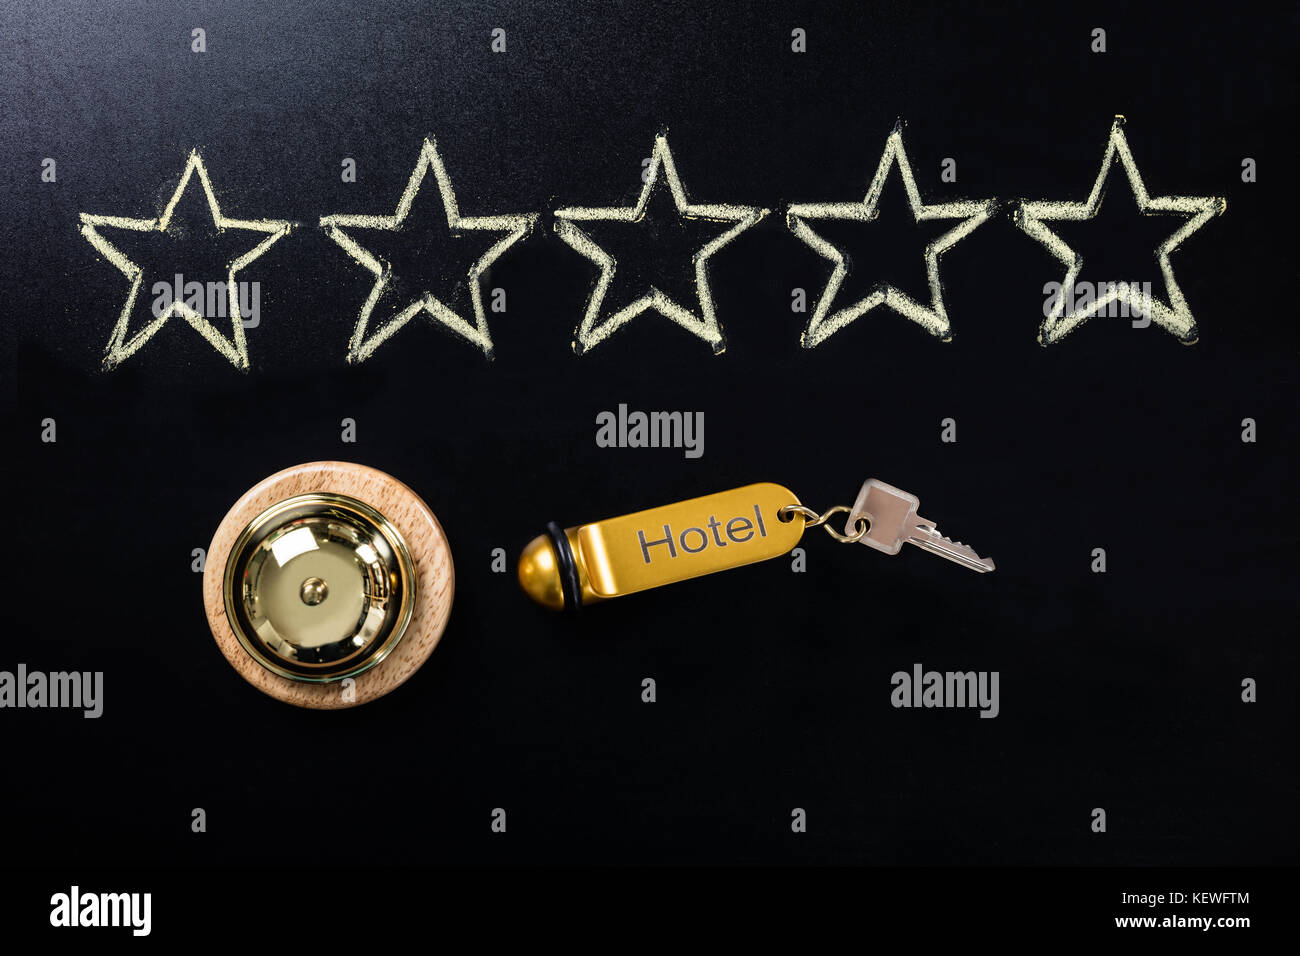 Five Star Service Concept  With Service Bell And Hotel Key On Blackboard Stock Photo